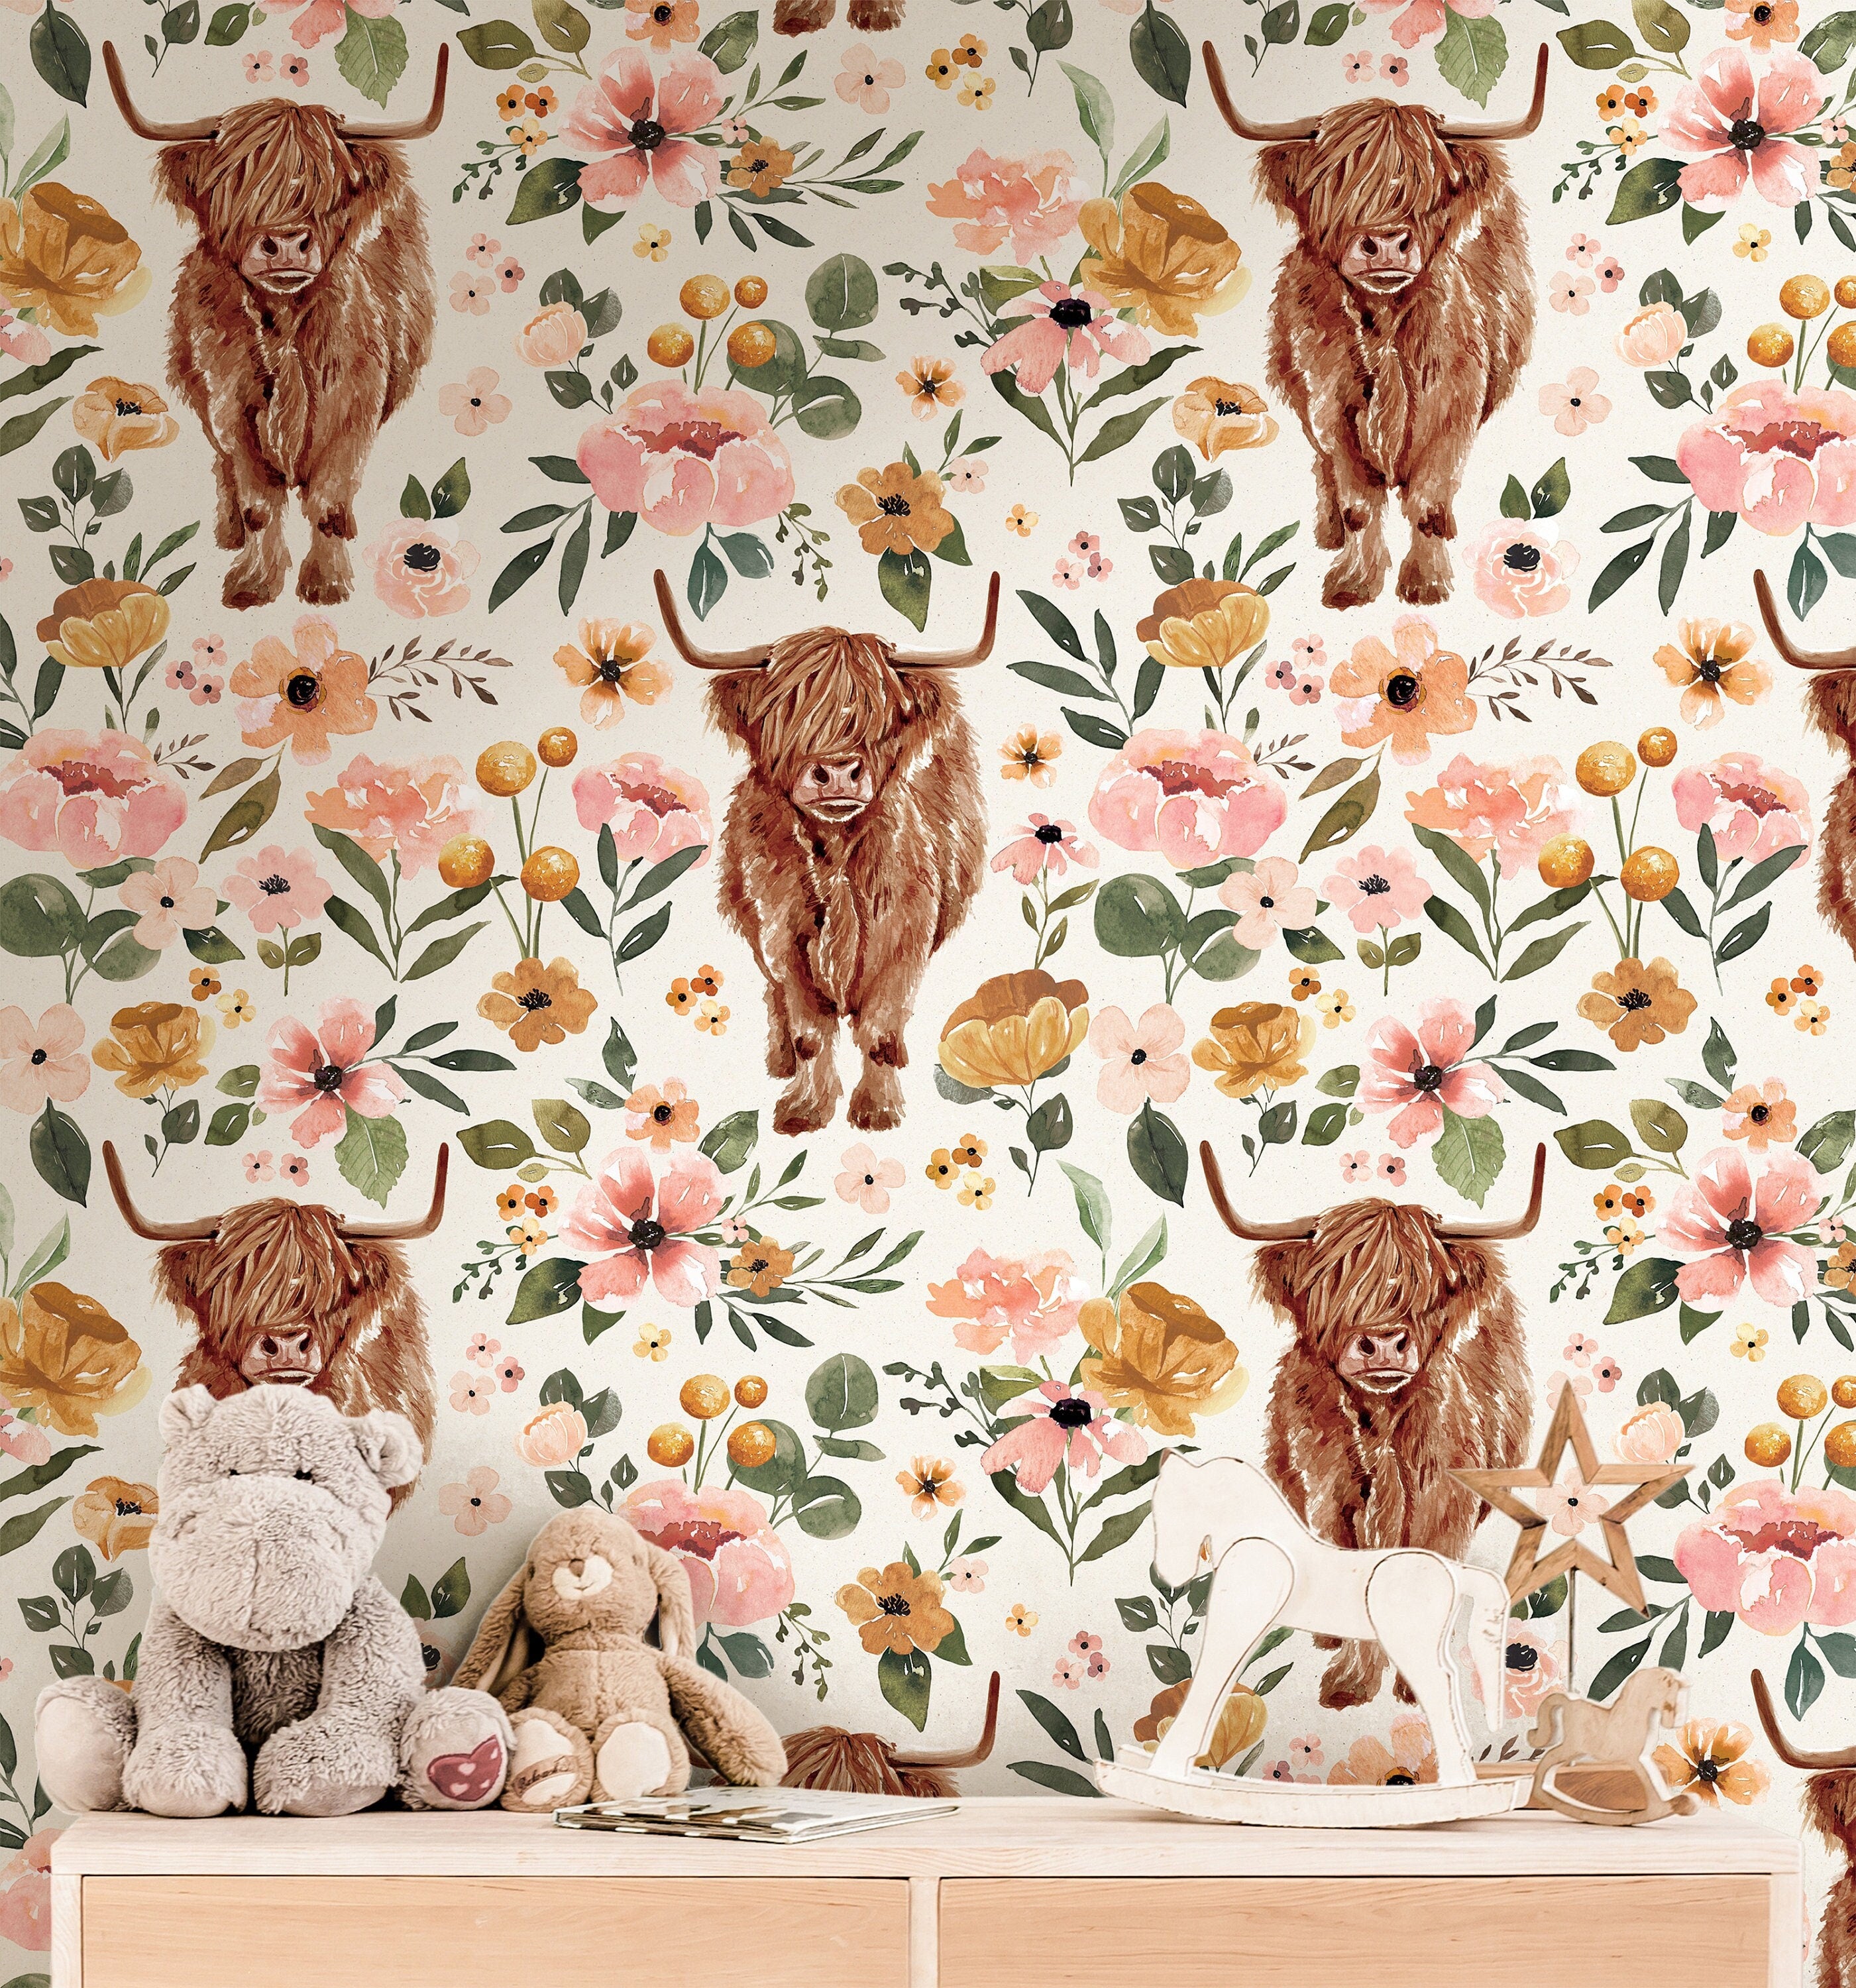 Floral Removable Wallpaper For A Fun & Cheerful Interior